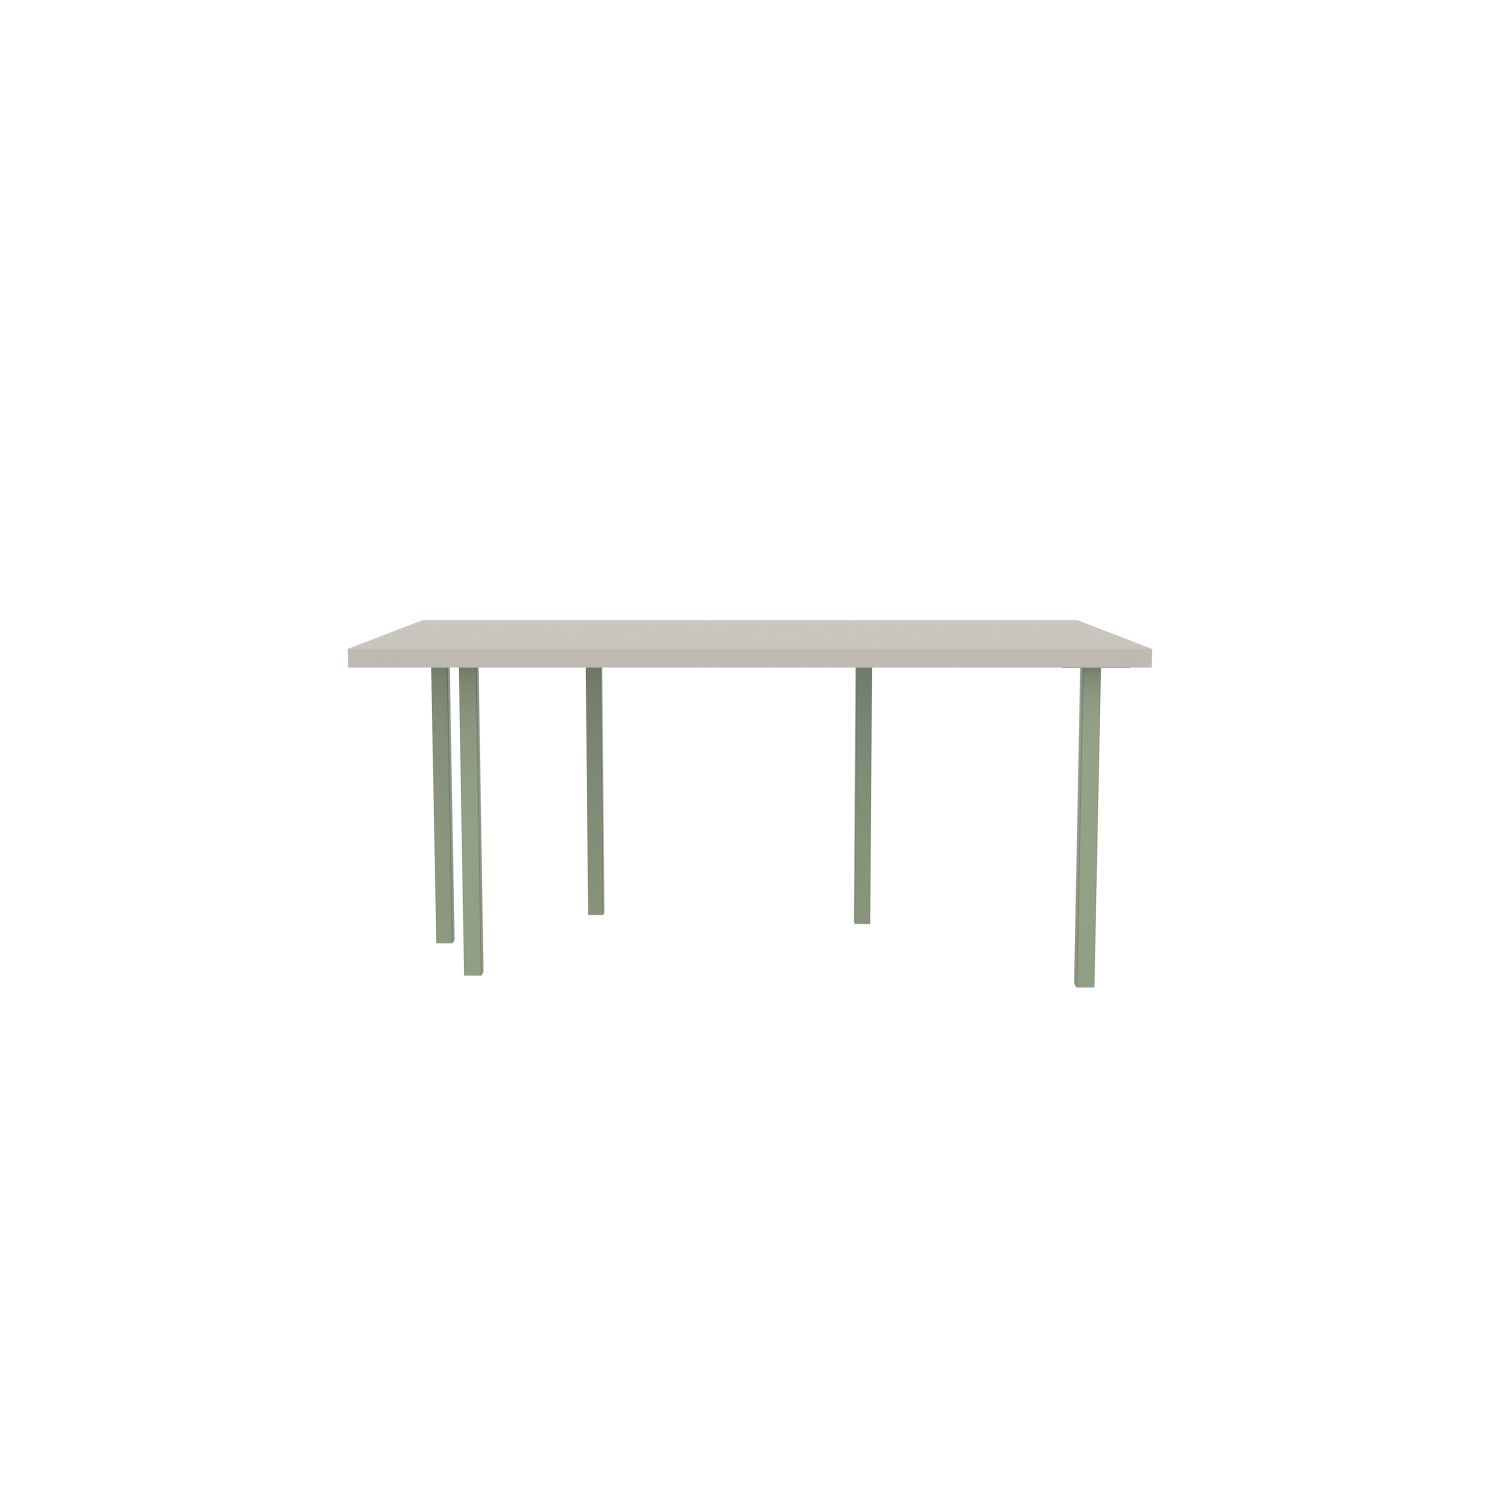 lensvelt bbrand table five fixed heigt 103x172 hpl white 50 mm price level 1 green ral6021